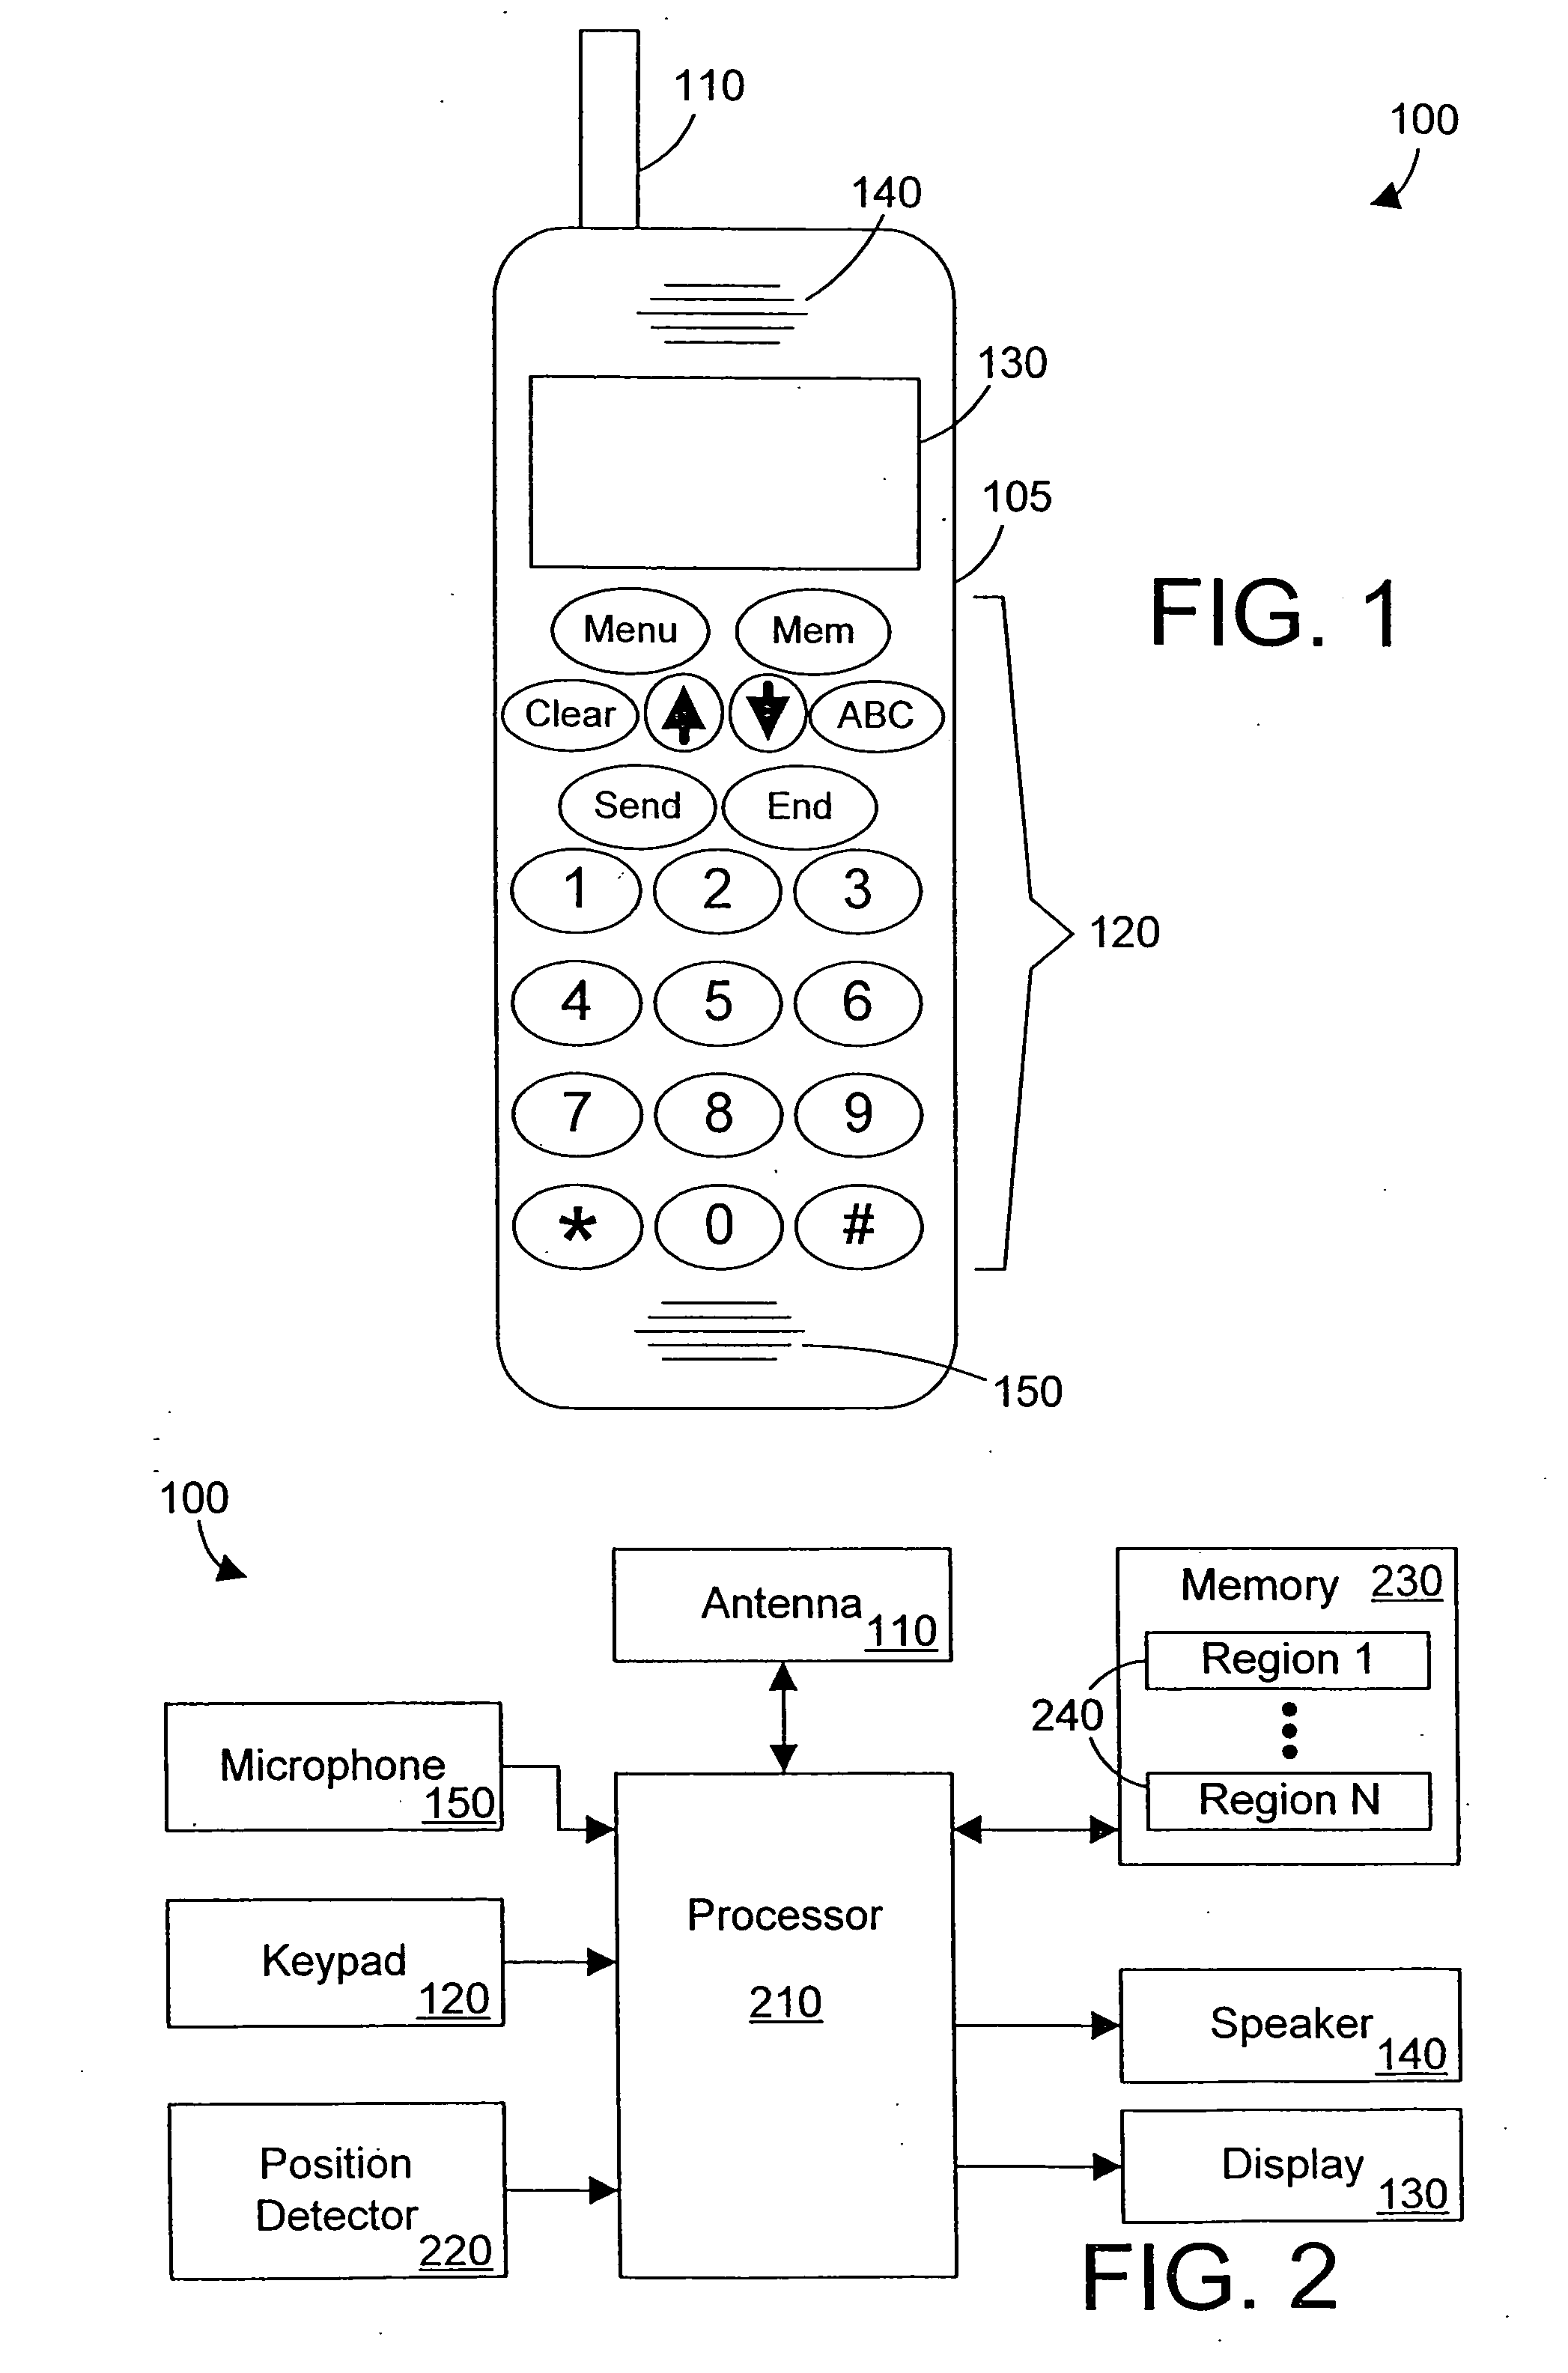 Method and system for selectively paging a communication device